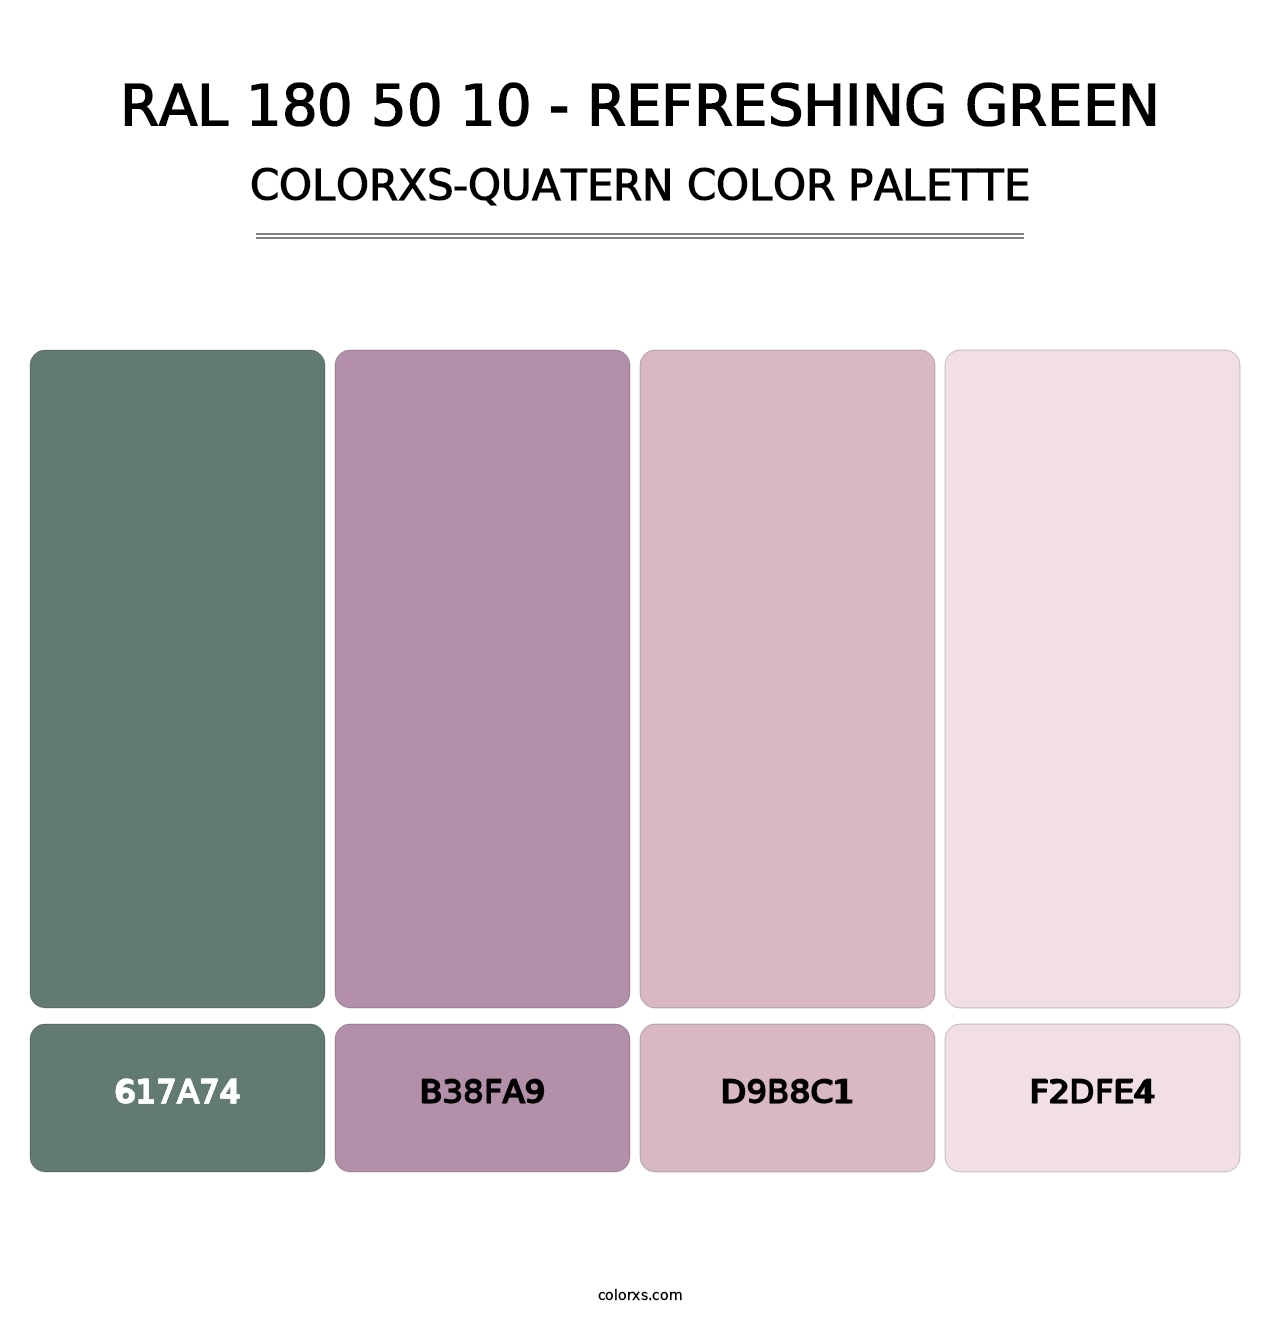 RAL 180 50 10 - Refreshing Green - Colorxs Quatern Palette